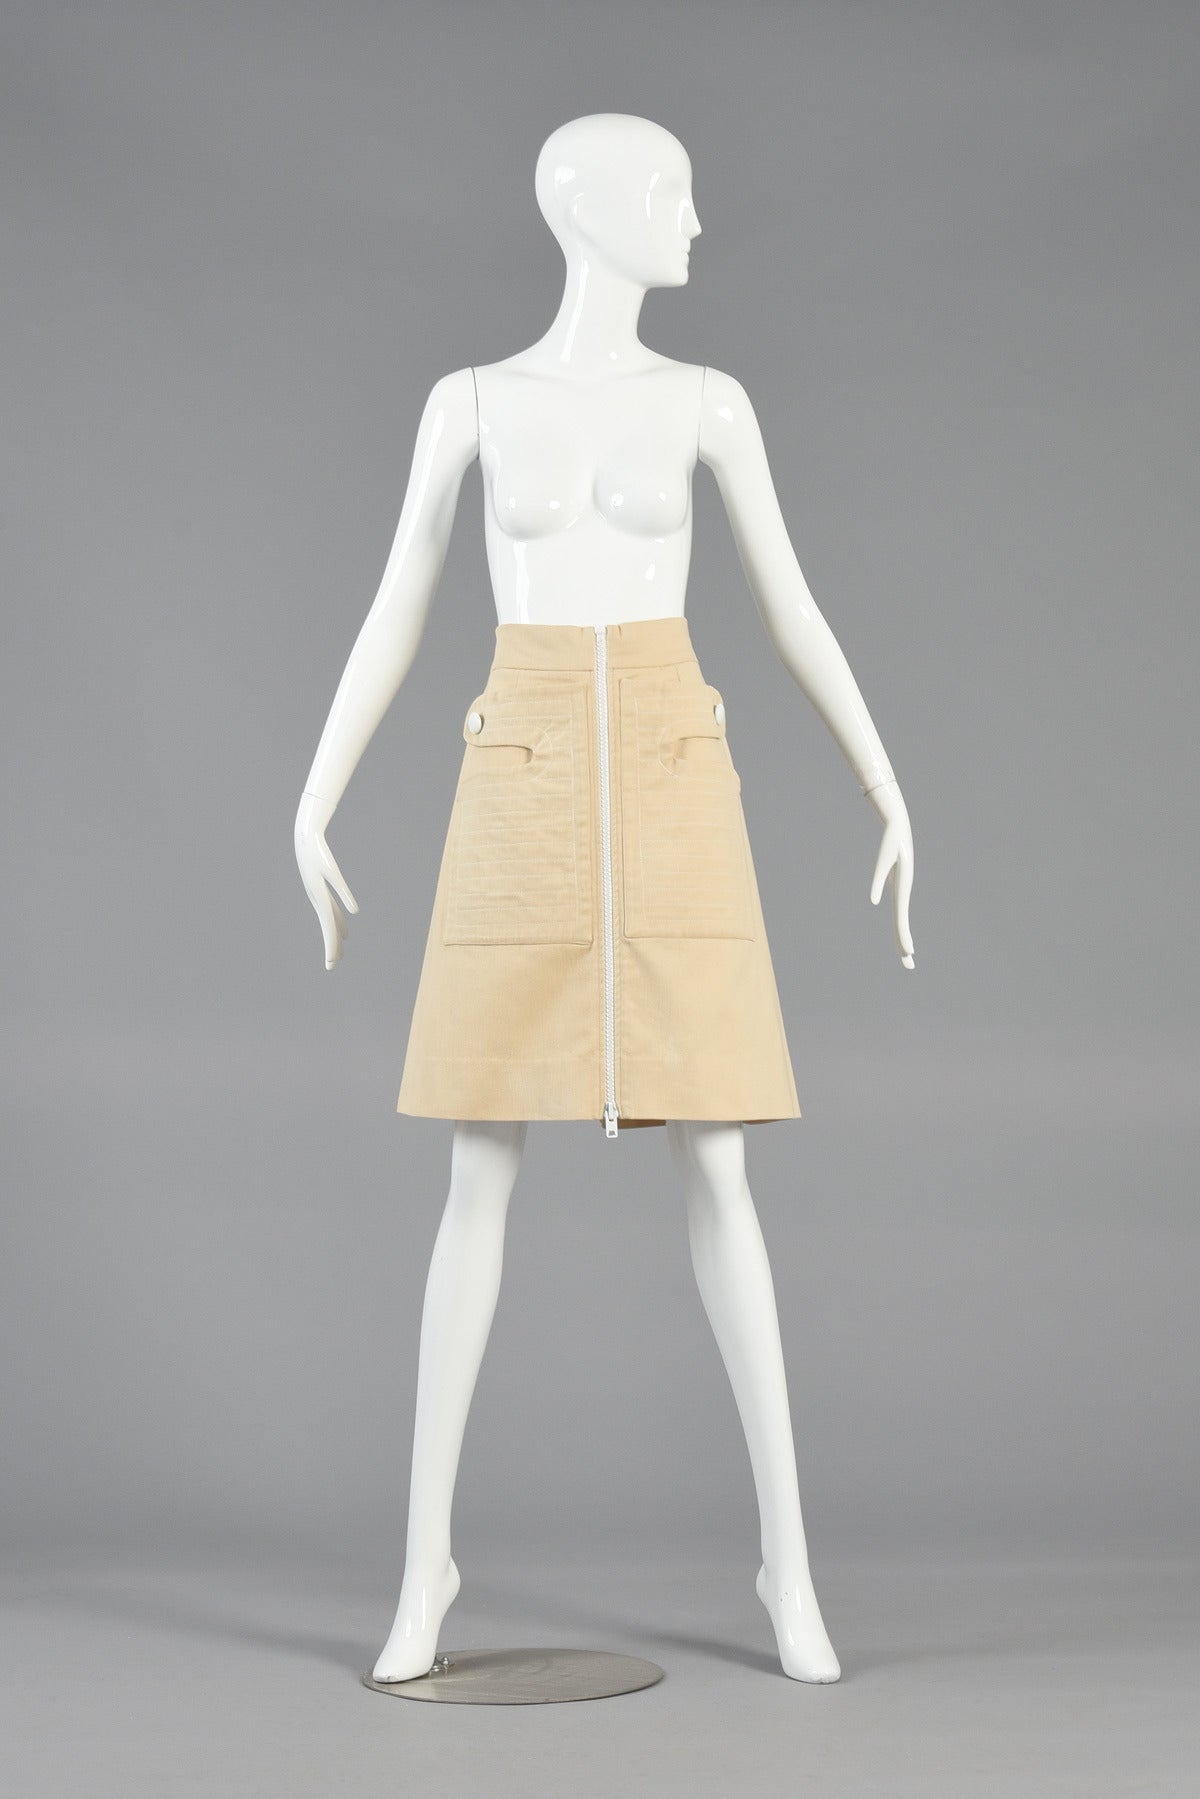 Killer 1960's buttercream colored Pierre Cardin space age skirt. Absolutely awesome find! Buttercream heavy-weight brushed cotton (almost feels like a brushed denim) with wide adjustable zipper down the front. Of course the best part though are the